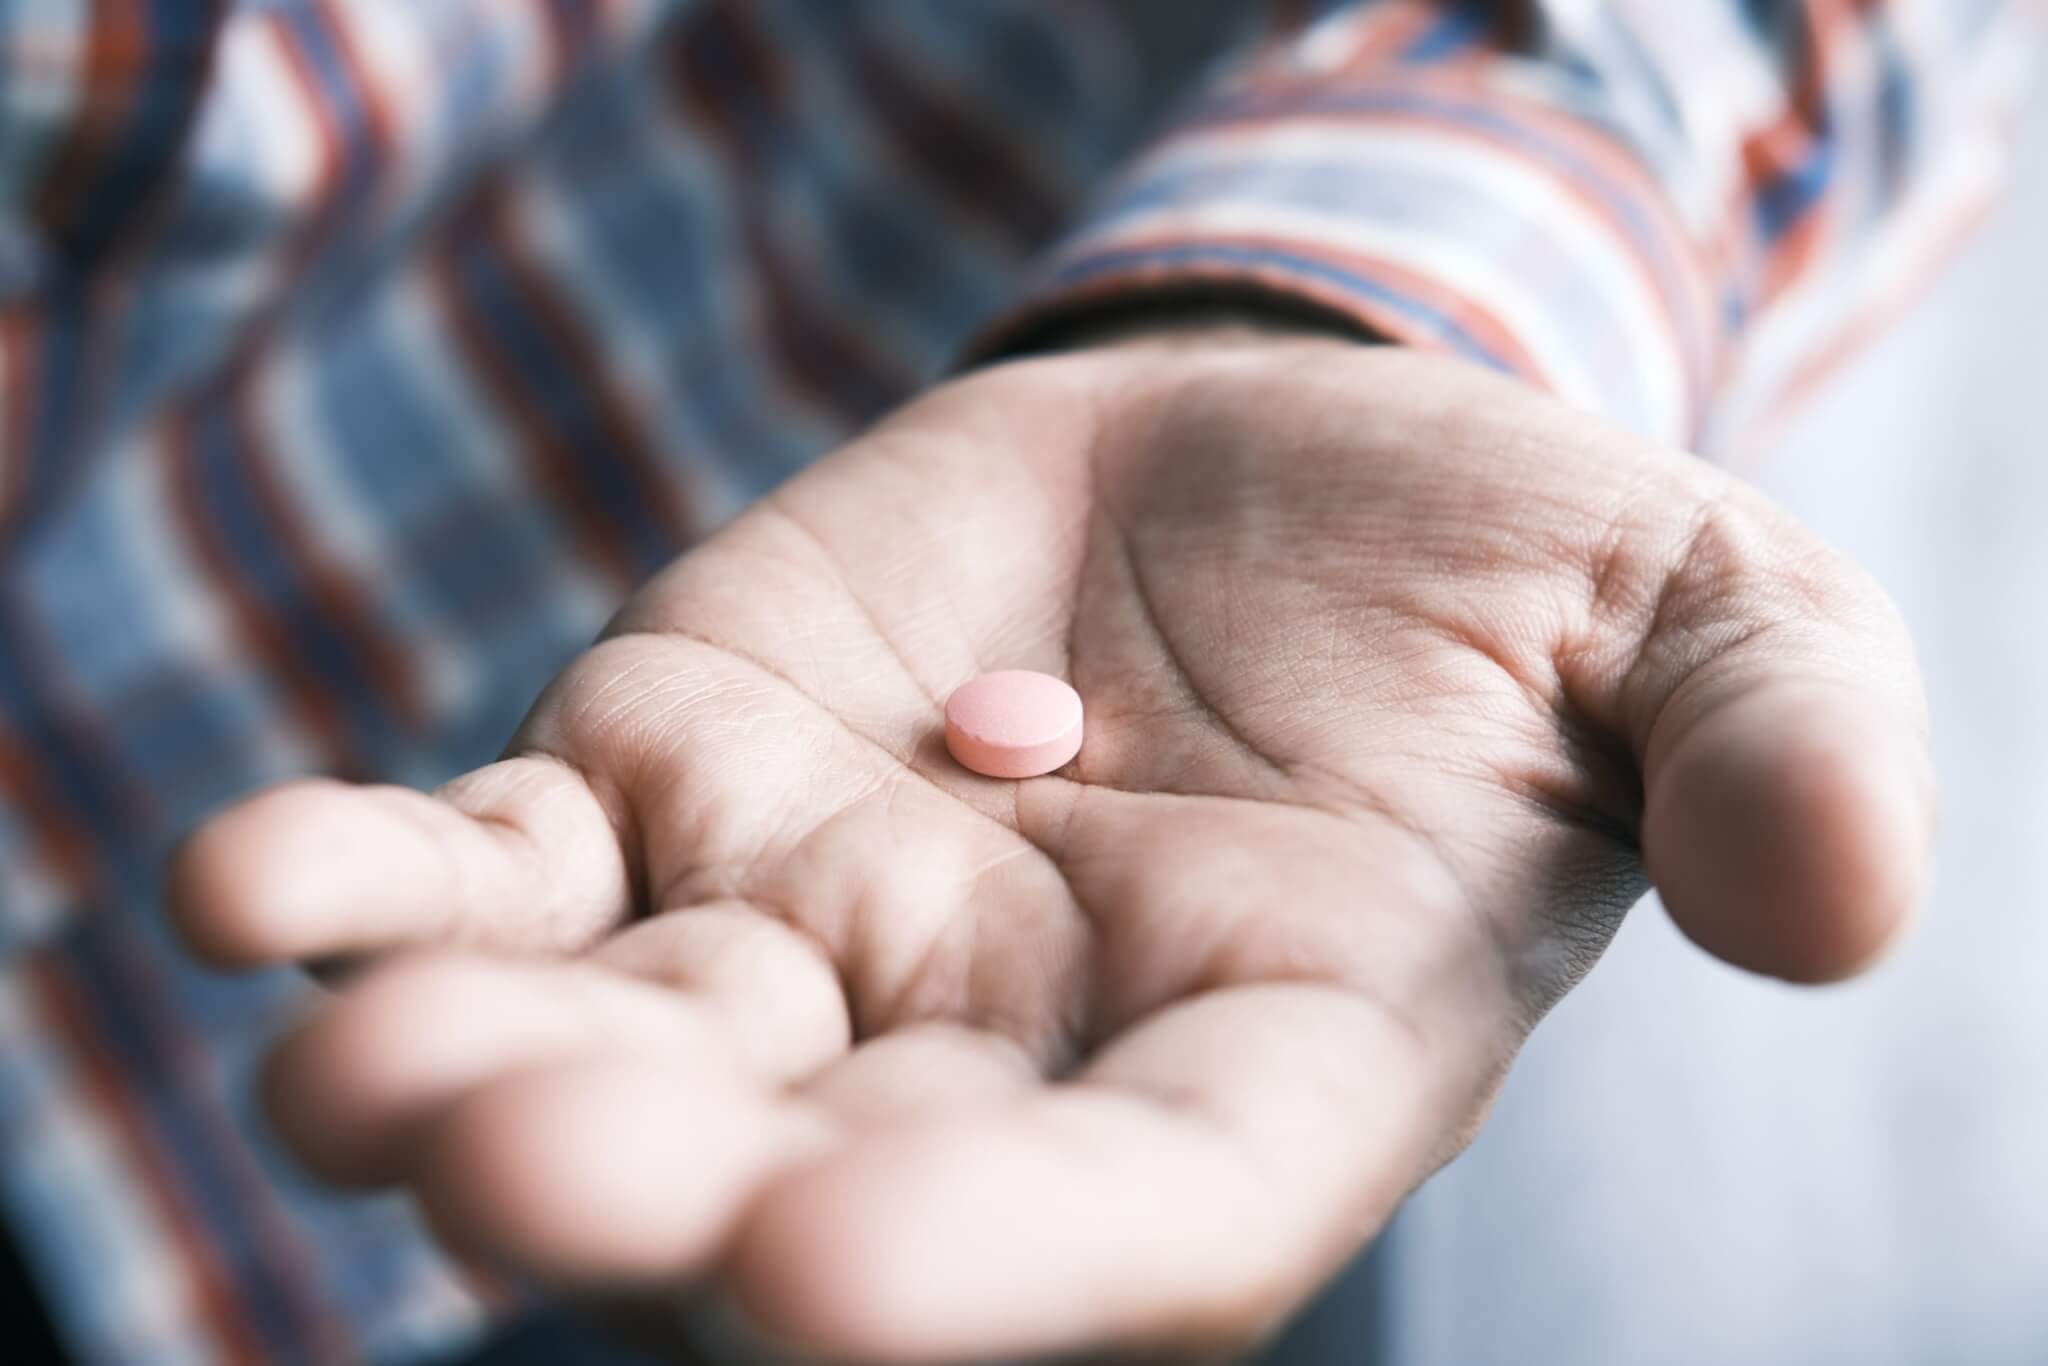 Man holding a pill or medication in his hand